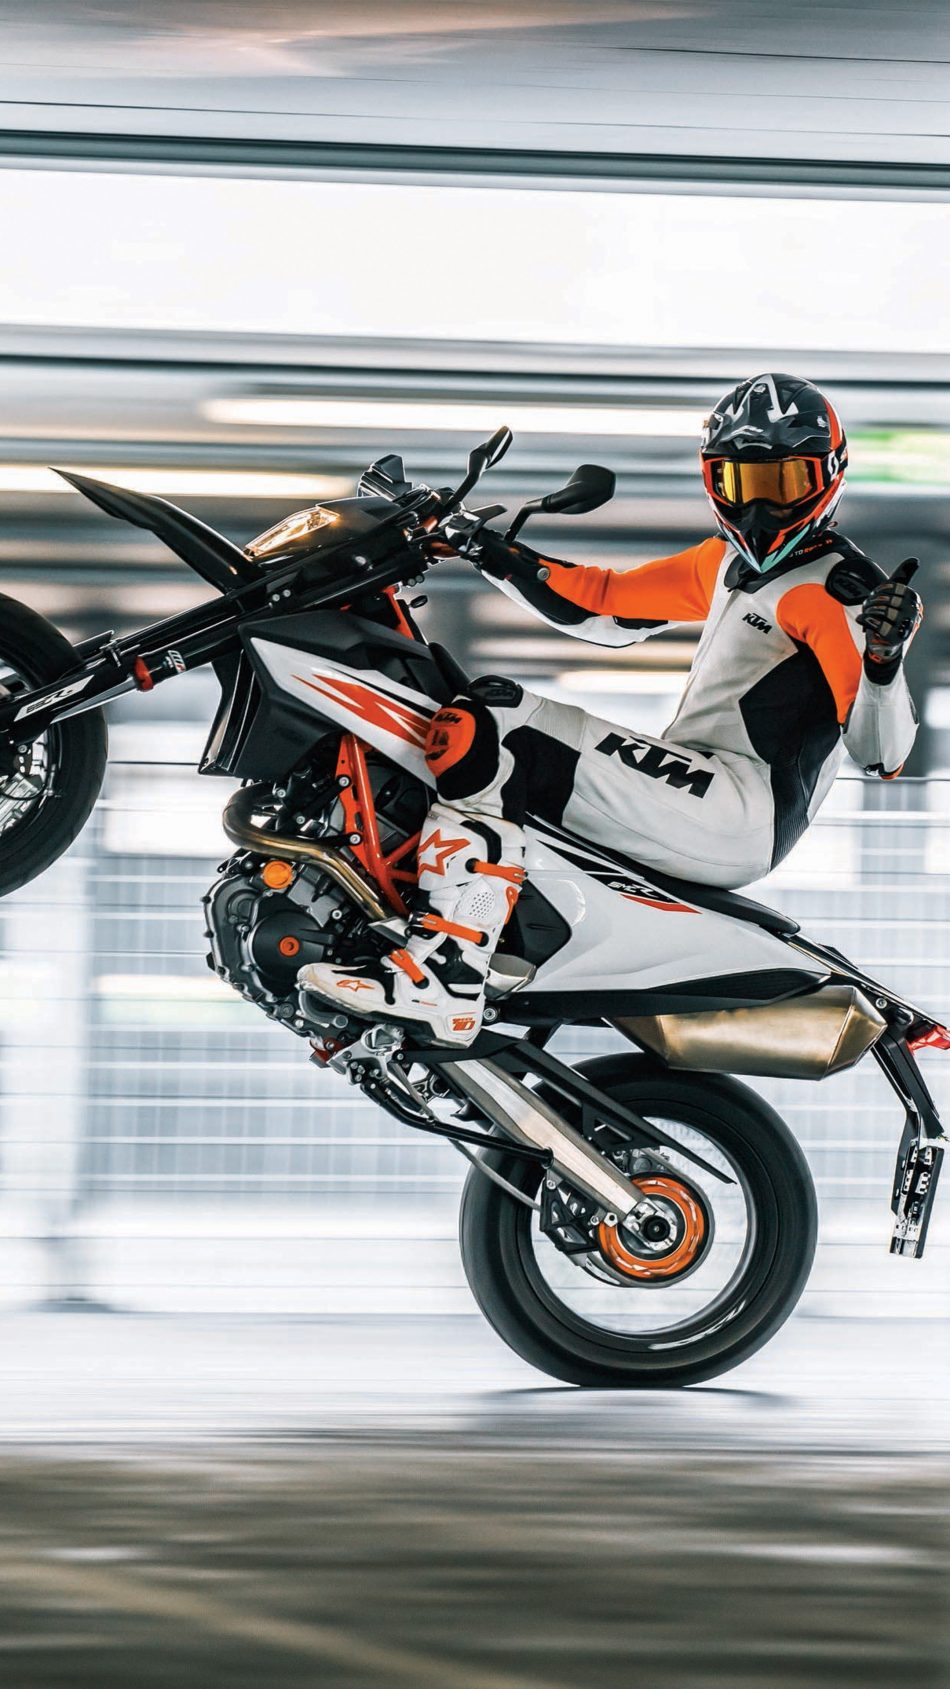 ktm wallpaper for mobile,motorcycle racer,supermoto,motorcycle,vehicle,stunt performer